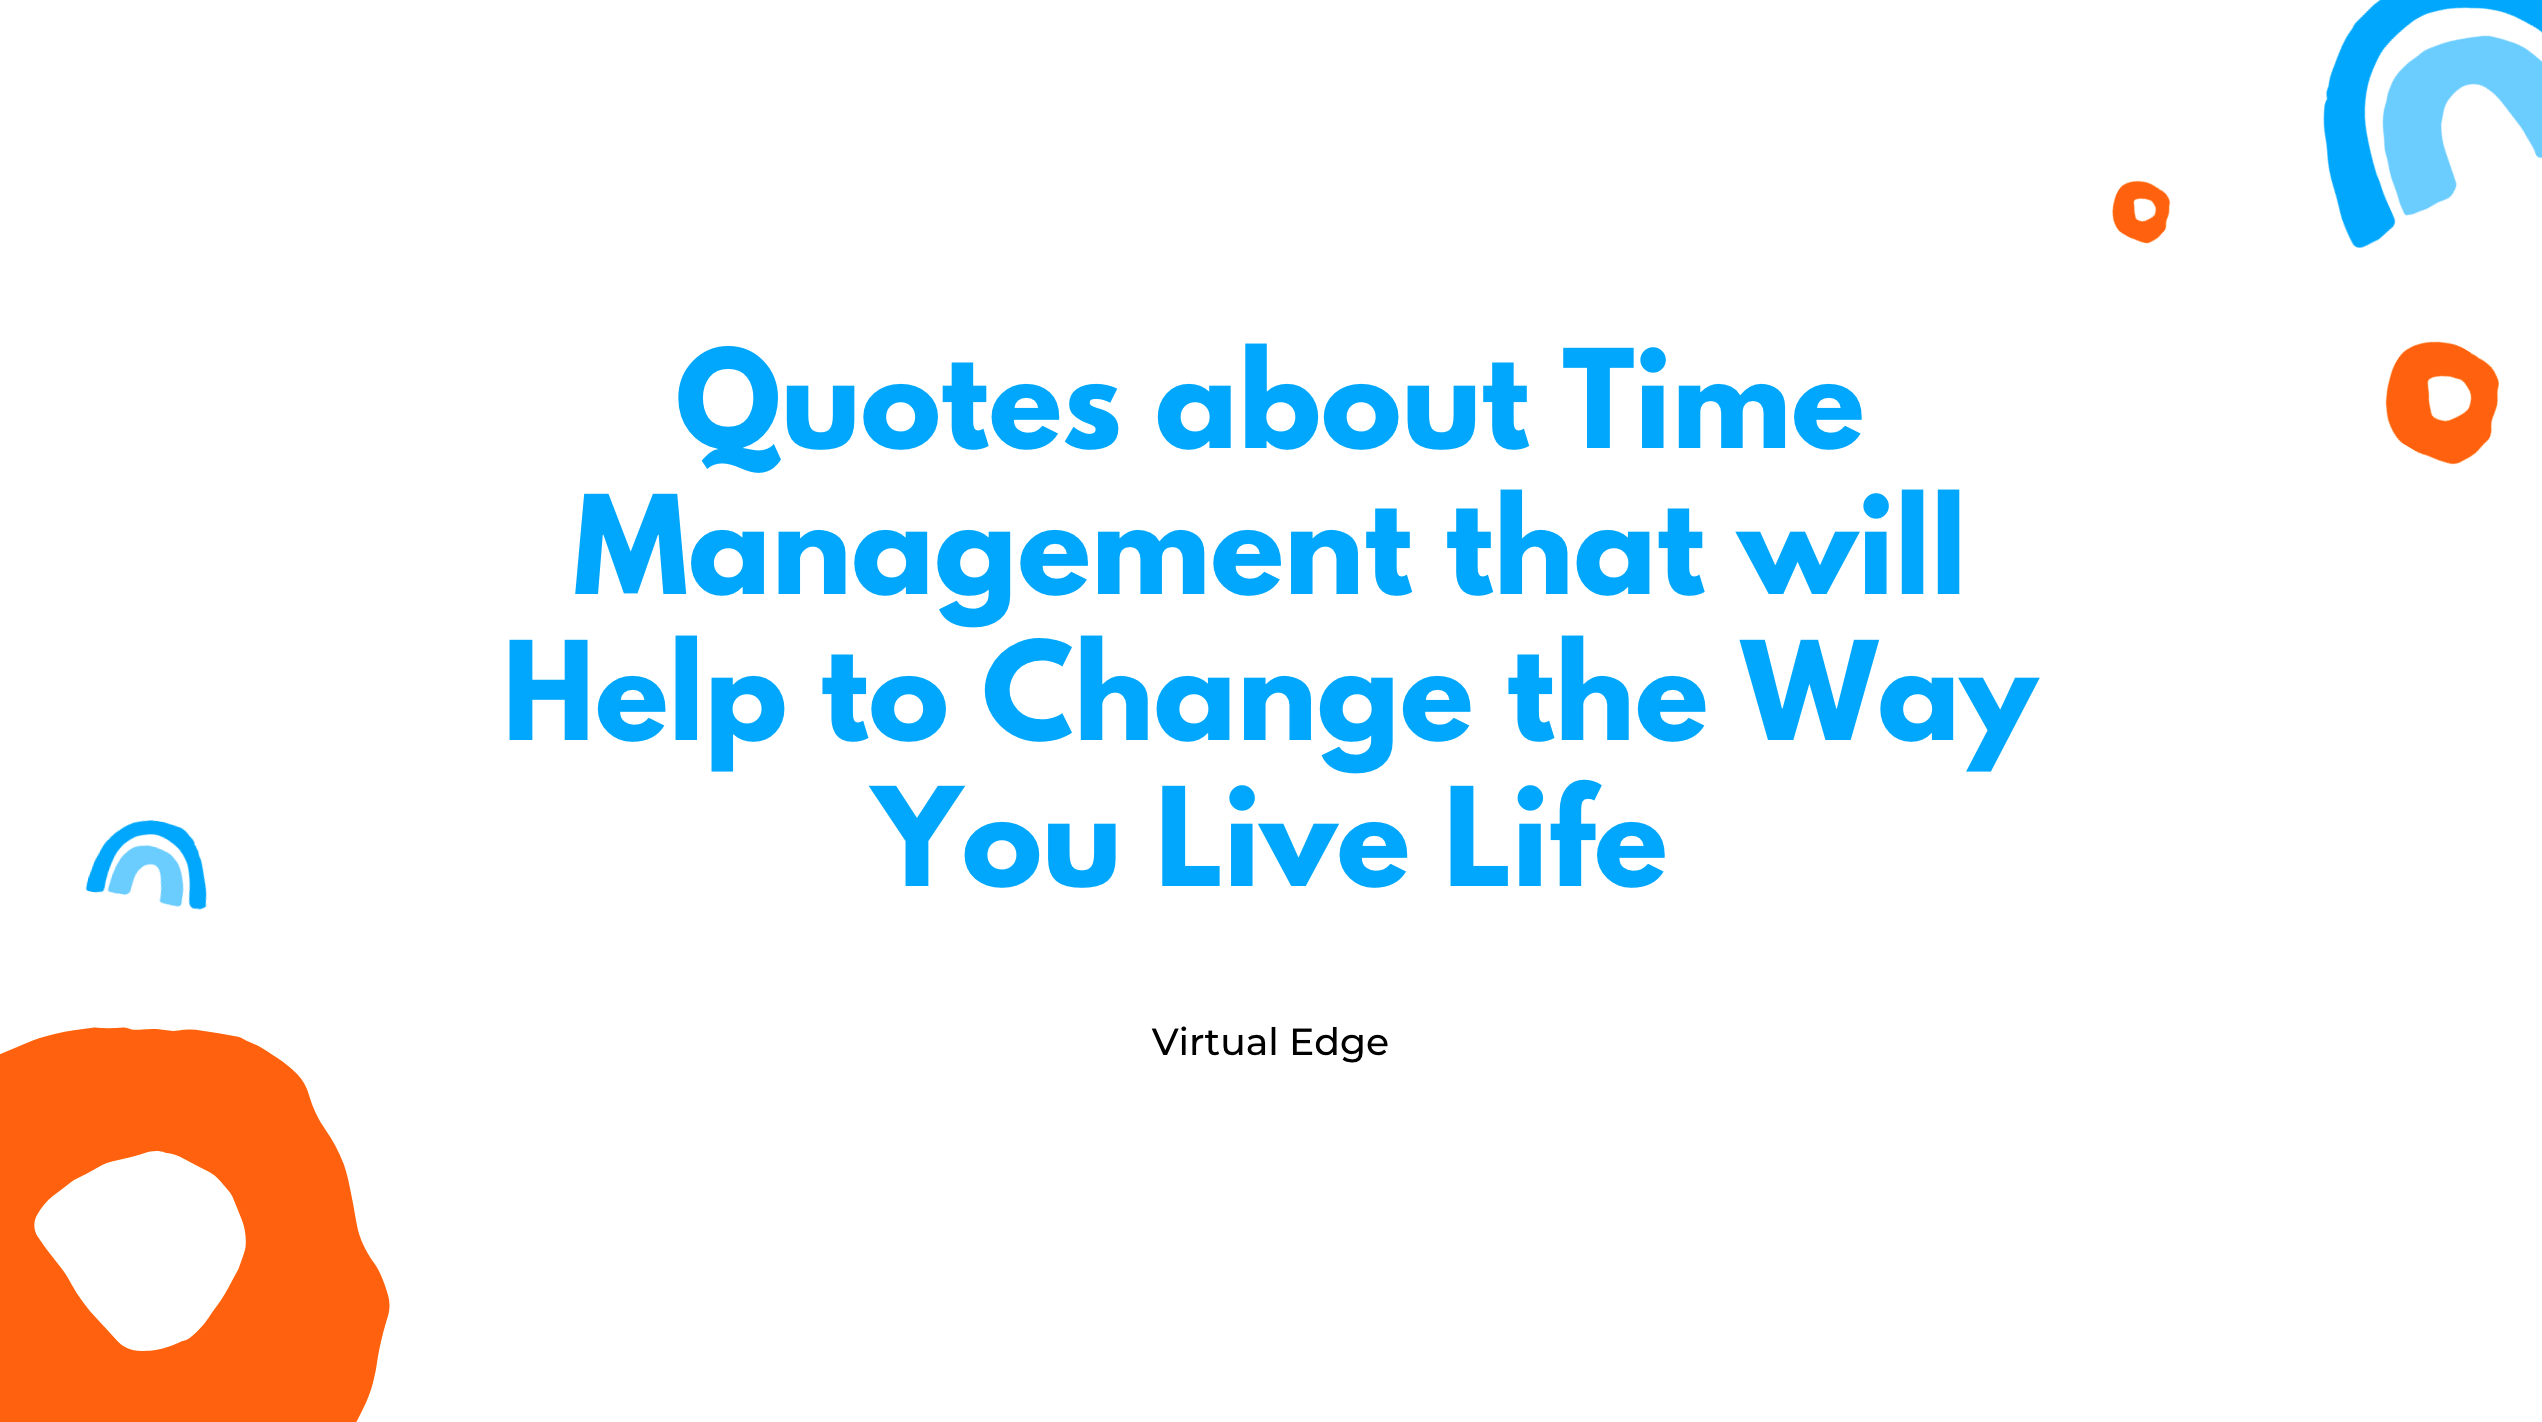 Quotes about Time Management that will Help to Change the Way You Live Life